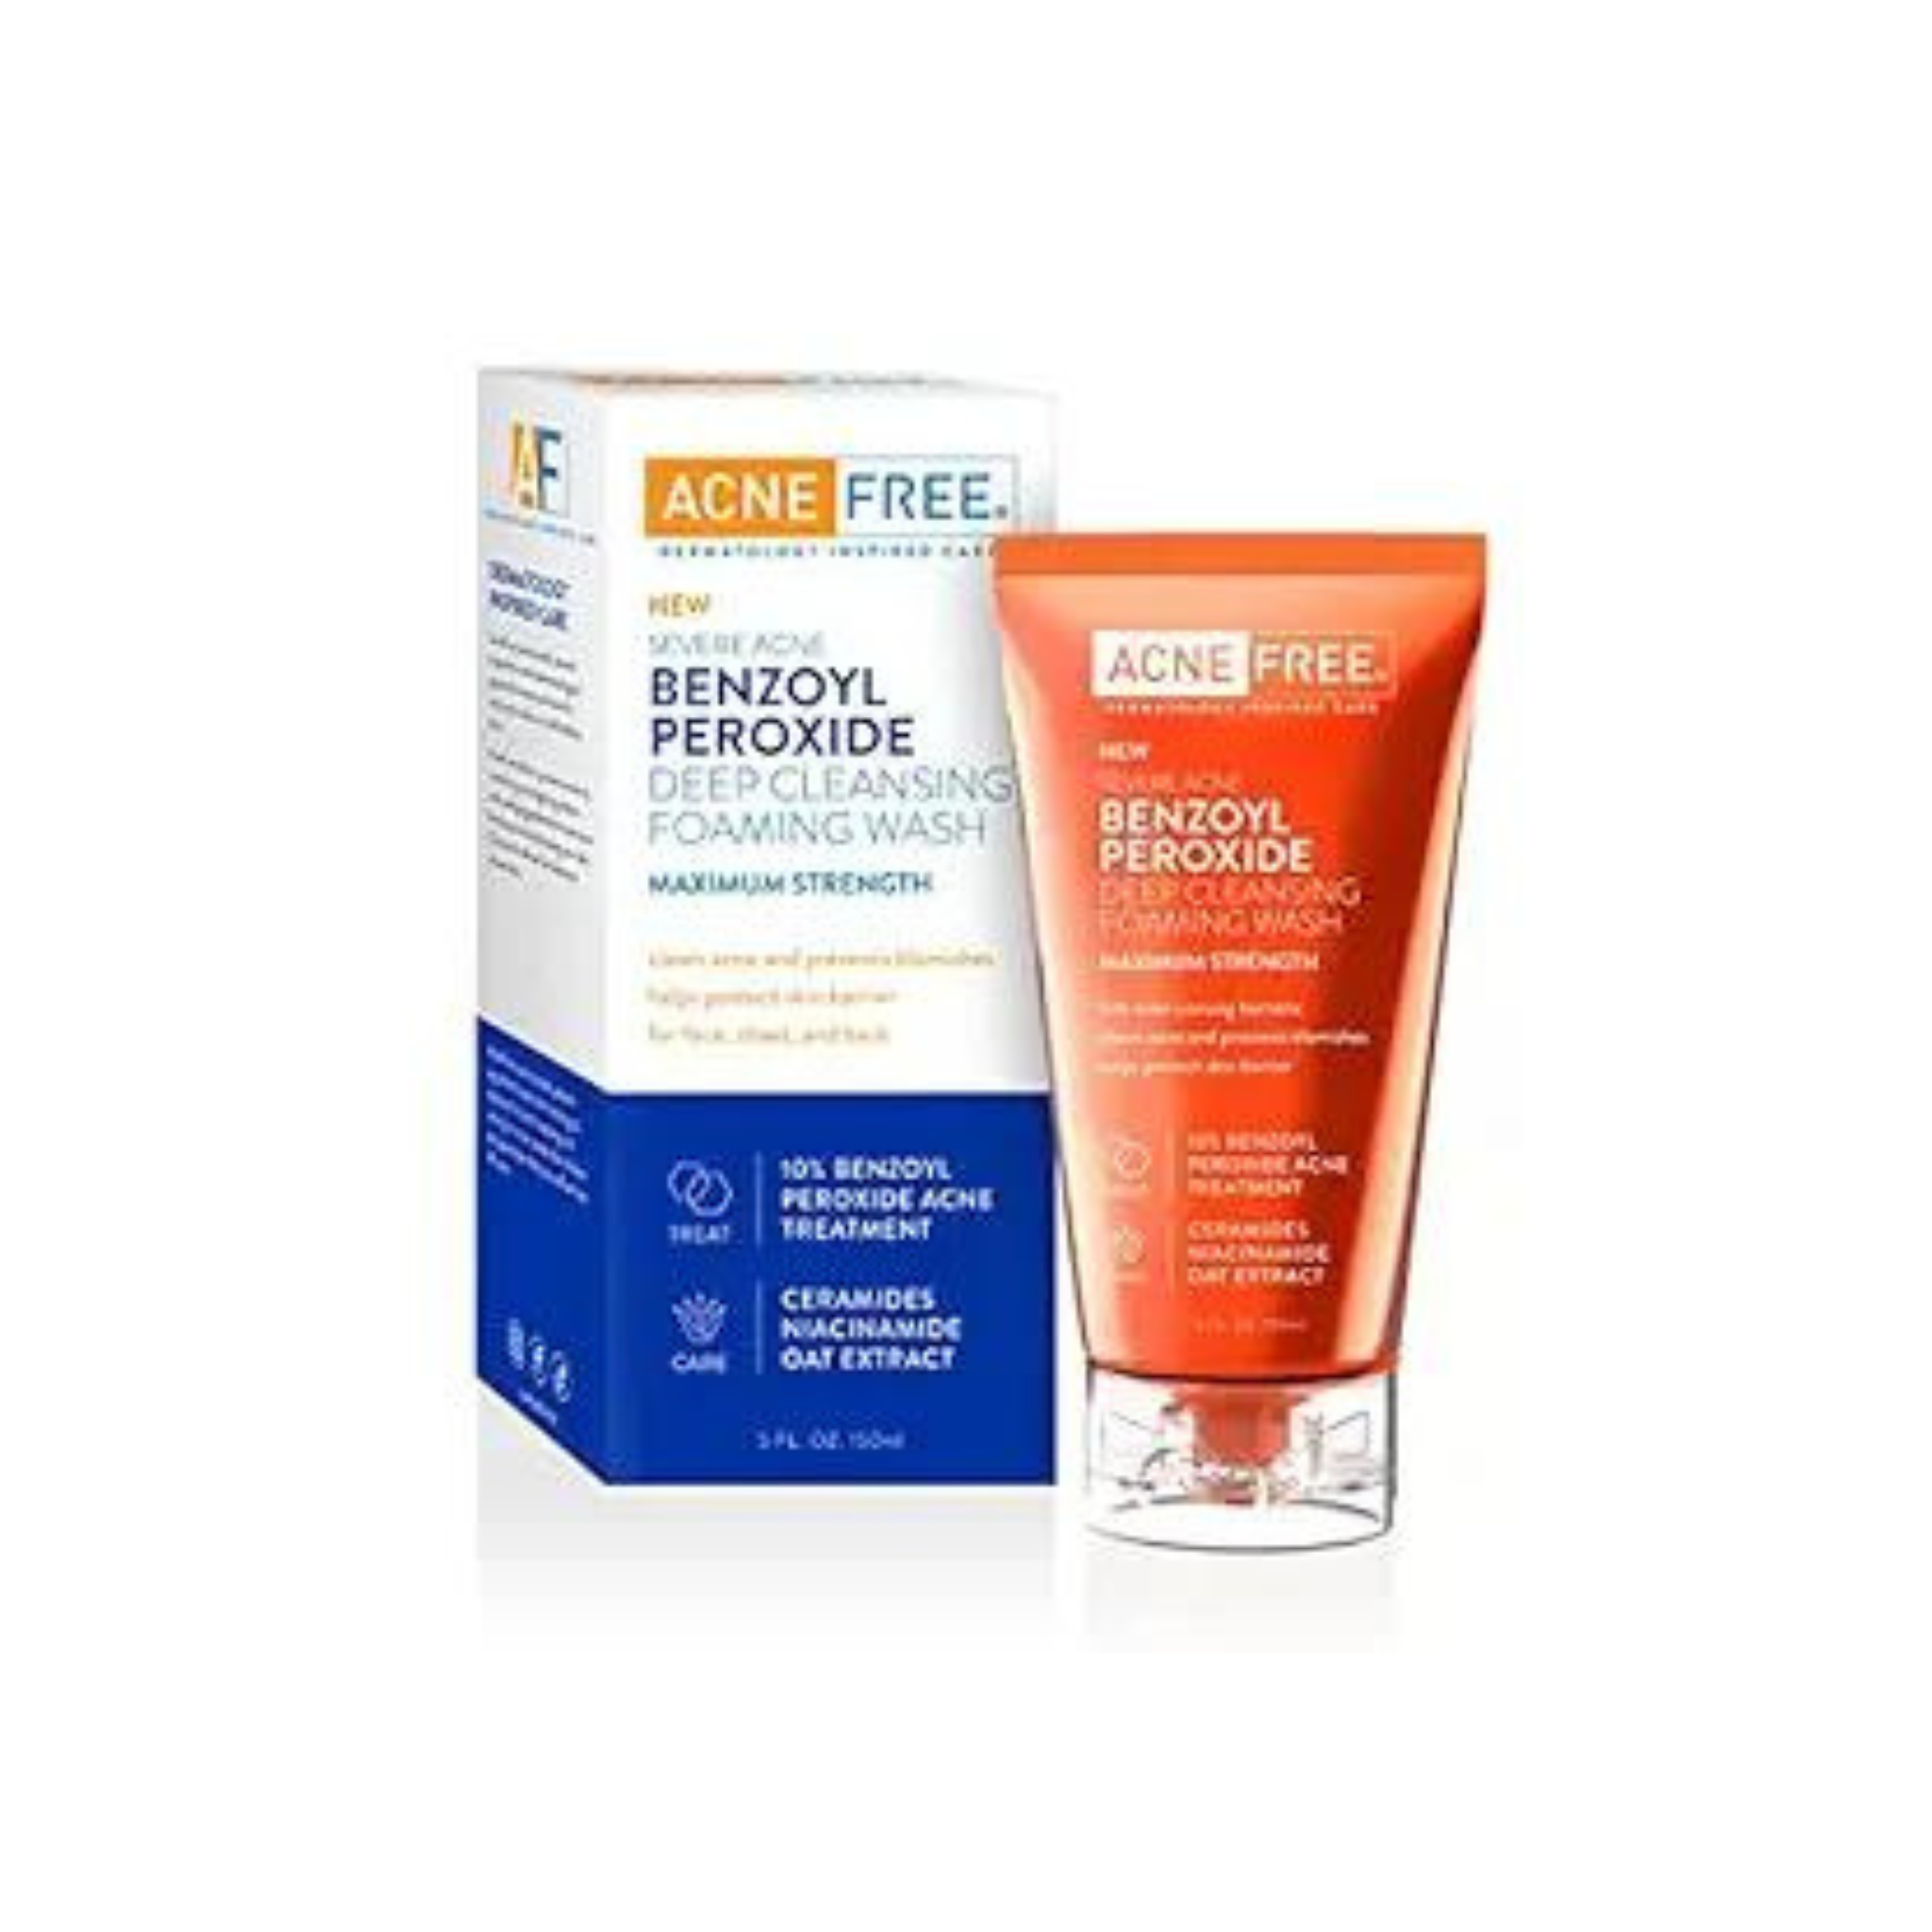 5-Oz AcneFree Severe Acne 10% Benzoyl Peroxide Cleansing Wash